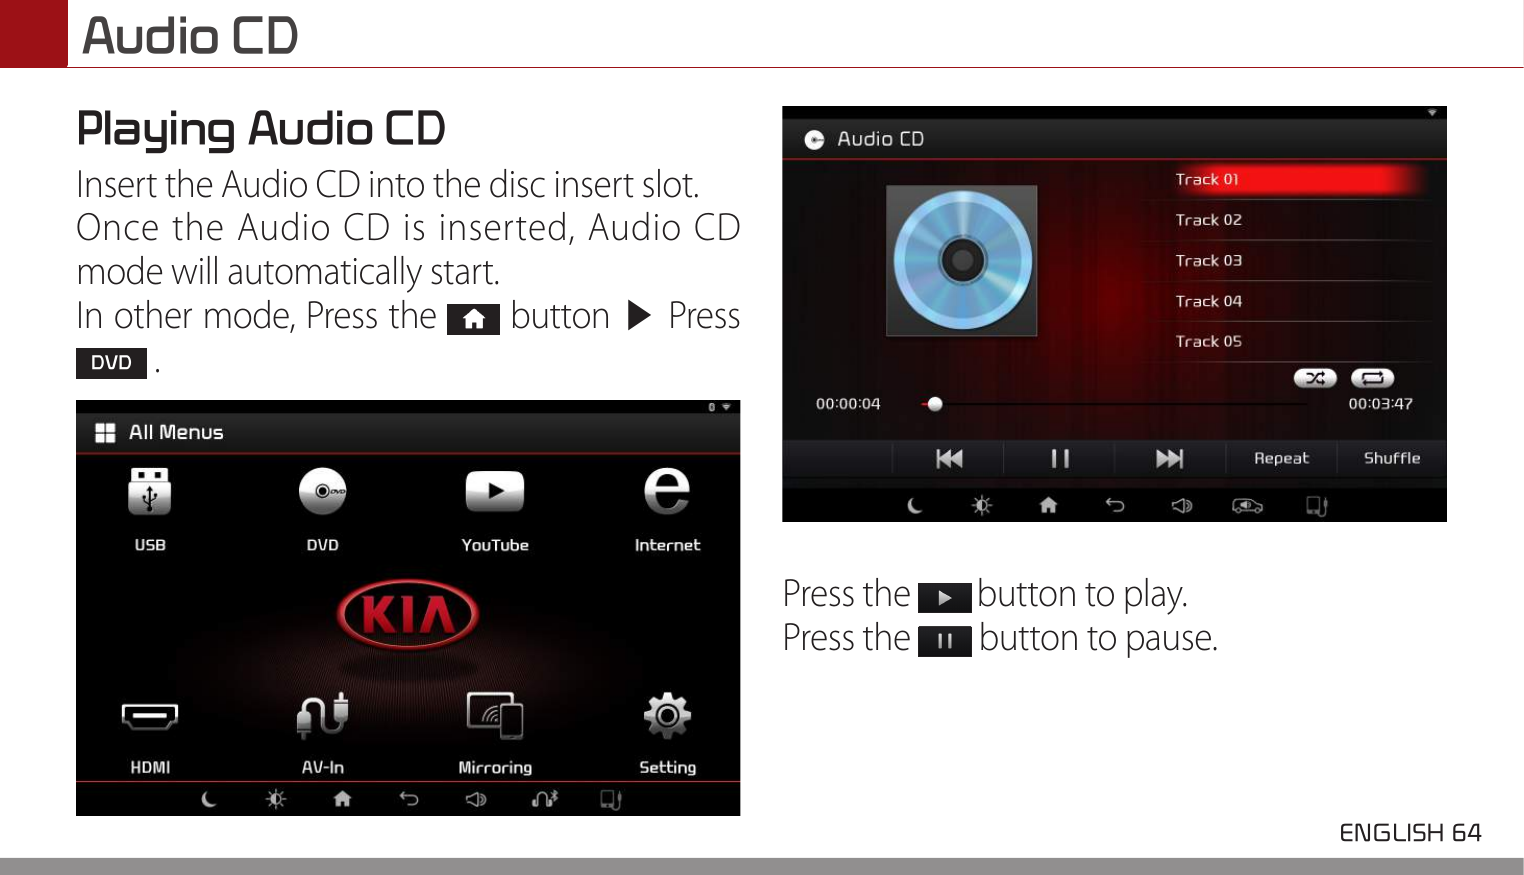 Audio CD ENGLISH 64 Playing Audio CD Insert the Audio CD into the disc insert slot.Once the Audio CD is inserted, Audio CD mode will automatically start.In other mode, Press the   button ▶  Press  DVD .Press the   button to play.Press the   button to pause.